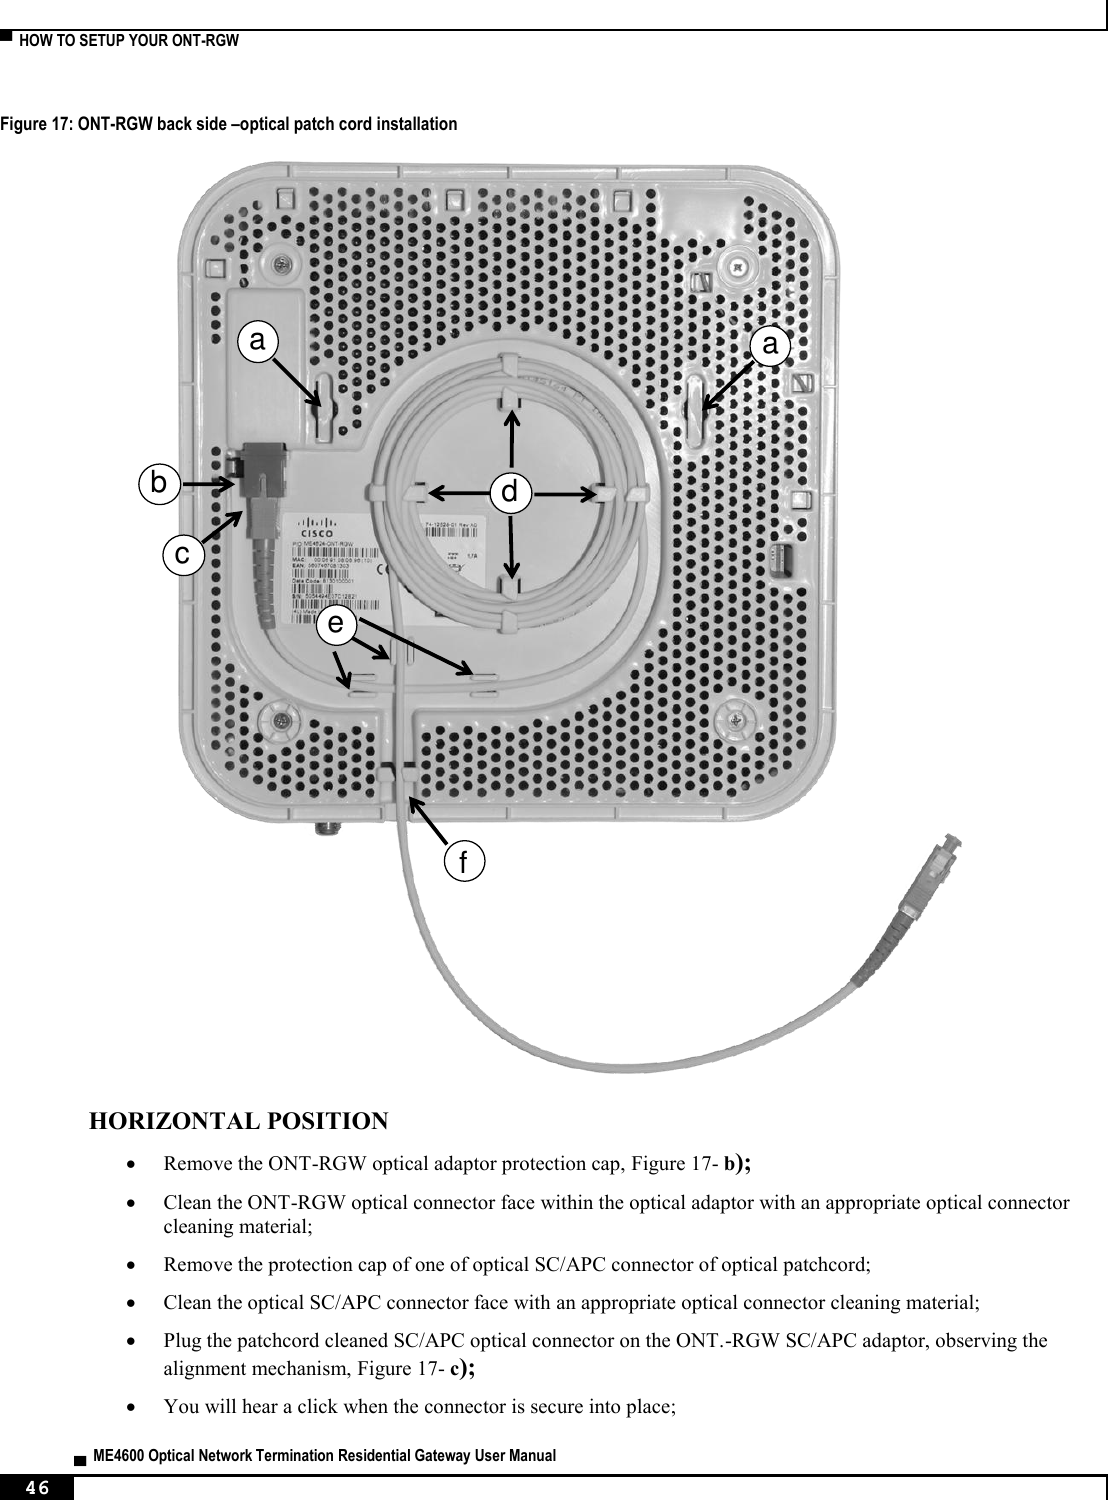  ▀  HOW TO SETUP YOUR ONT-RGW   ▄  ME4600 Optical Network Termination Residential Gateway User Manual 46    Figure 17: ONT-RGW back side –optical patch cord installation   HORIZONTAL POSITION  Remove the ONT-RGW optical adaptor protection cap, Figure 17- b);  Clean the ONT-RGW optical connector face within the optical adaptor with an appropriate optical connector cleaning material;  Remove the protection cap of one of optical SC/APC connector of optical patchcord;   Clean the optical SC/APC connector face with an appropriate optical connector cleaning material;  Plug the patchcord cleaned SC/APC optical connector on the ONT.-RGW SC/APC adaptor, observing the alignment mechanism, Figure 17- c);  You will hear a click when the connector is secure into place;  aabdefc